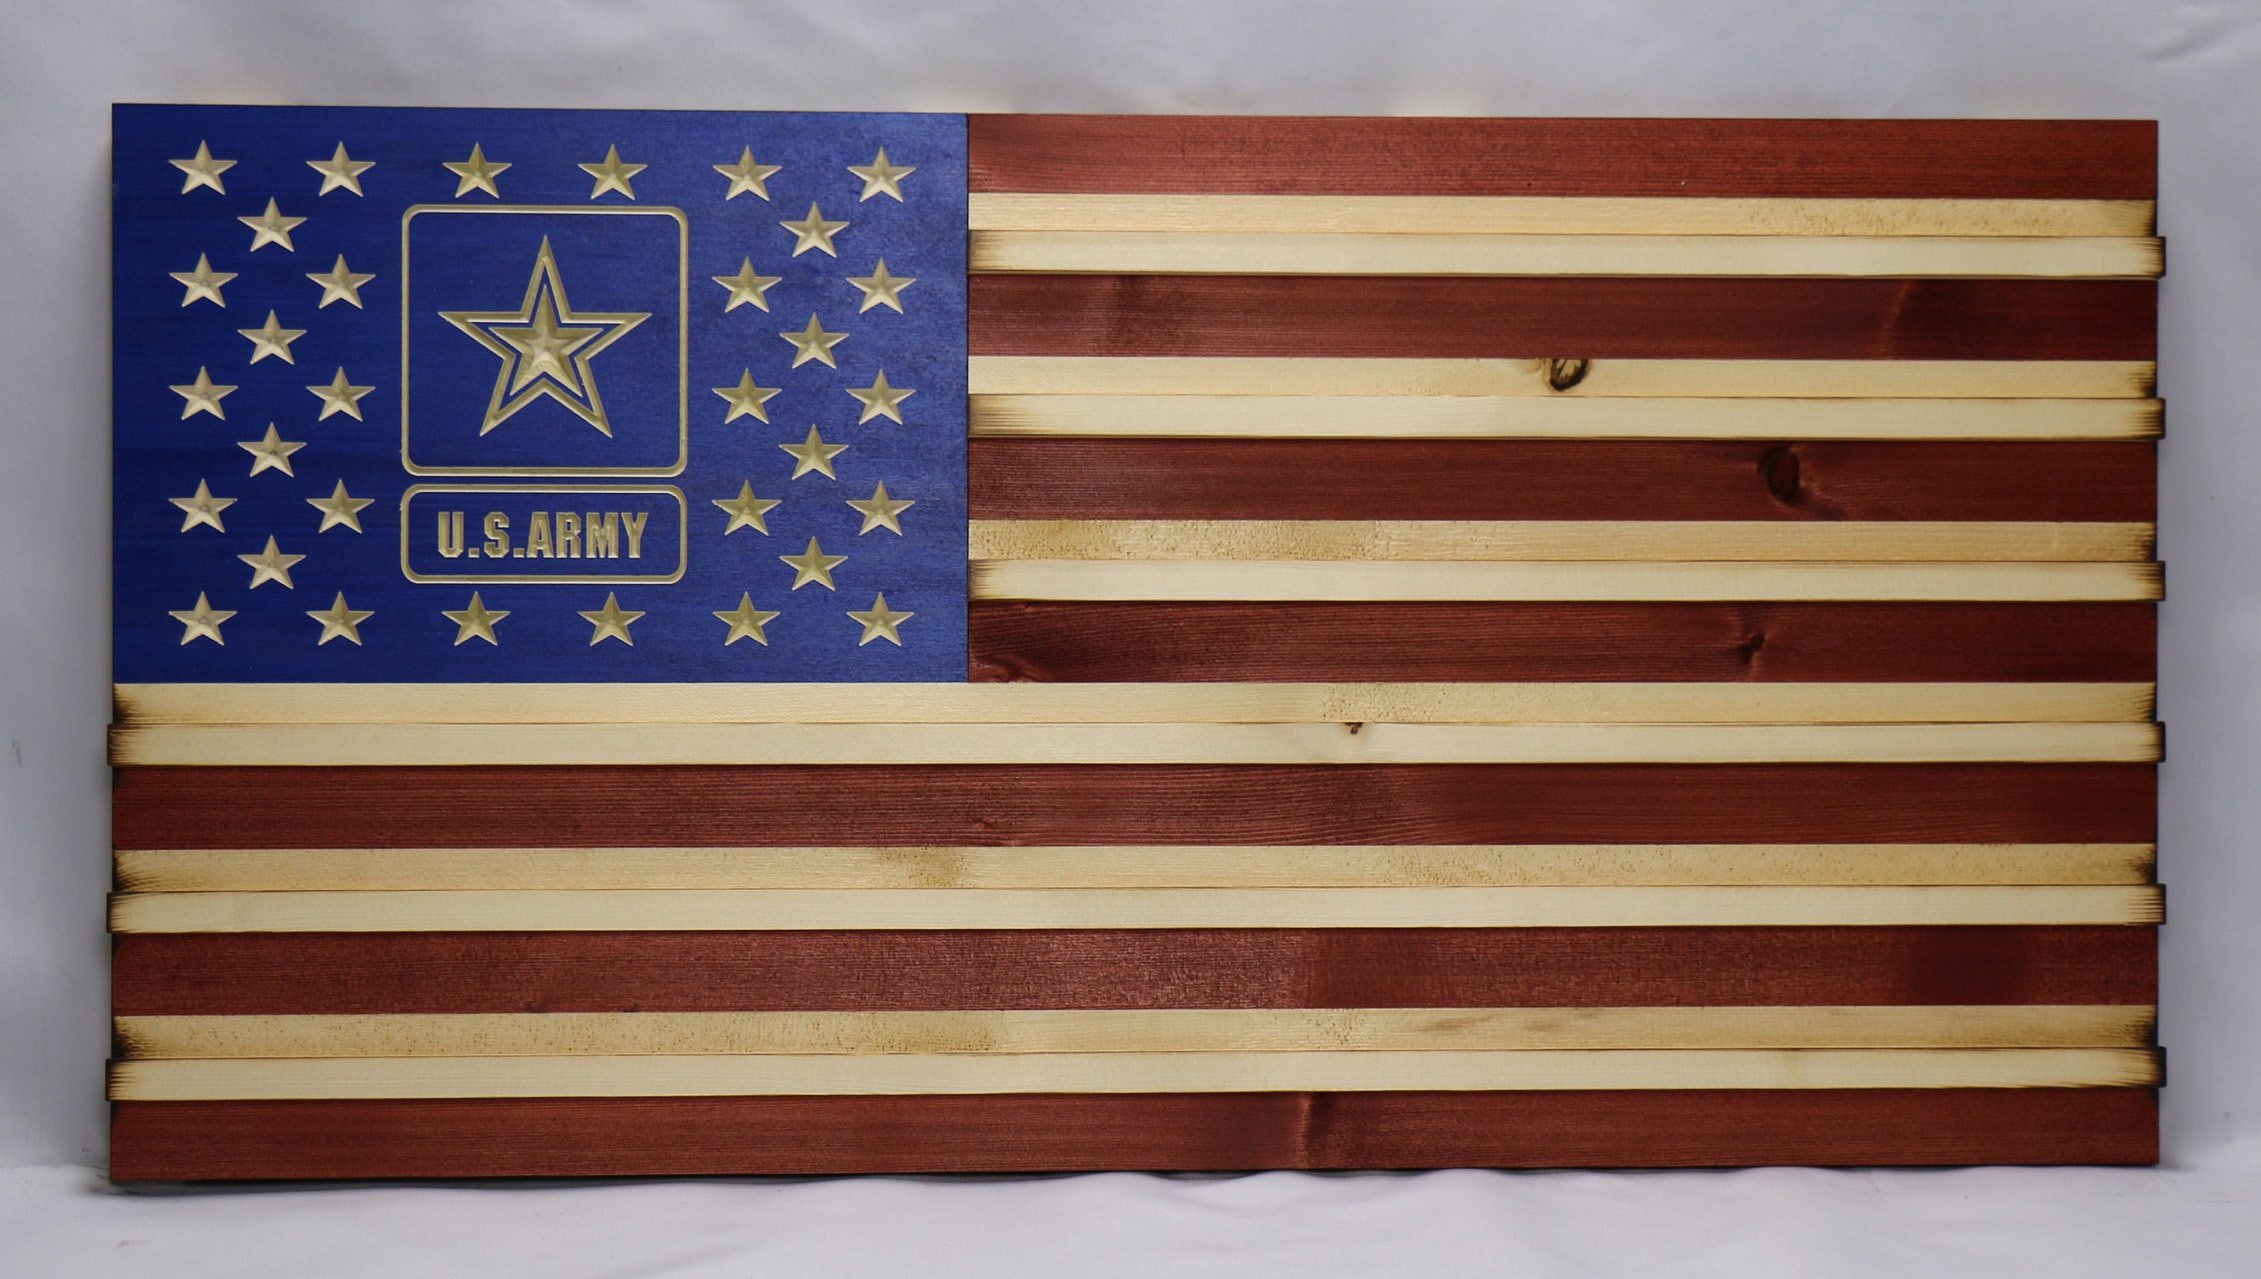 Large ARMY Rustic American Flag Challenge Coin Display 